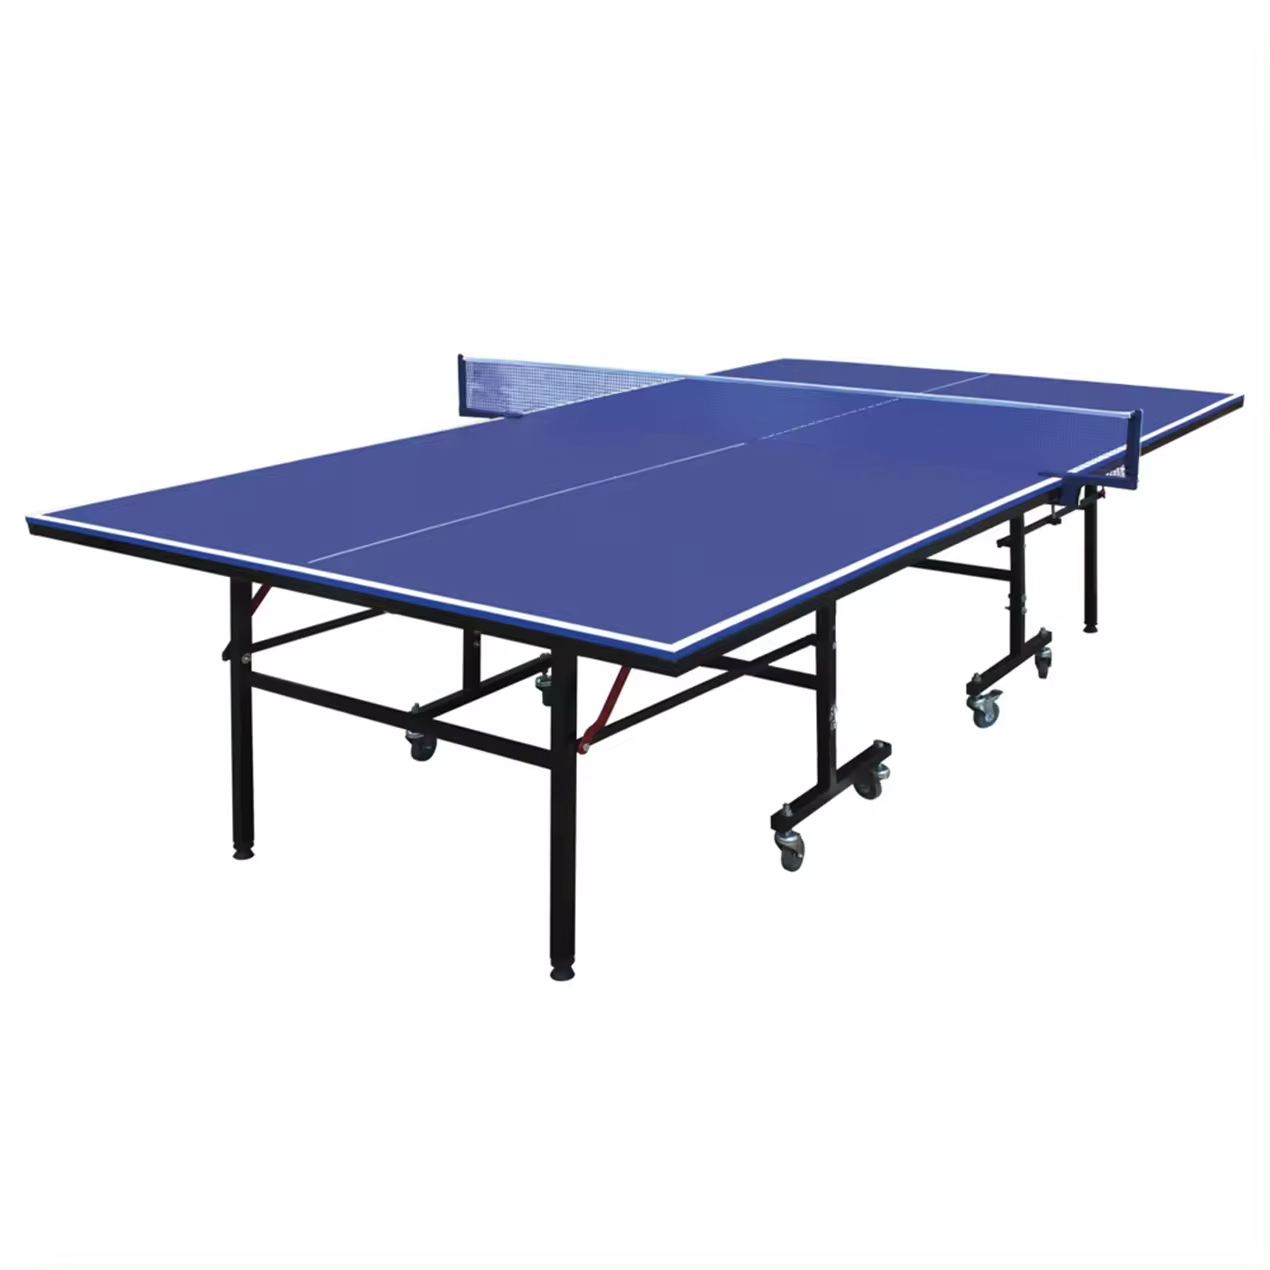 Professional Outdoor Indoor Table Tennis Table Movable Table With Wheels Eco-Friendly Anti-Corrosion Anti-UV Waterproof Features